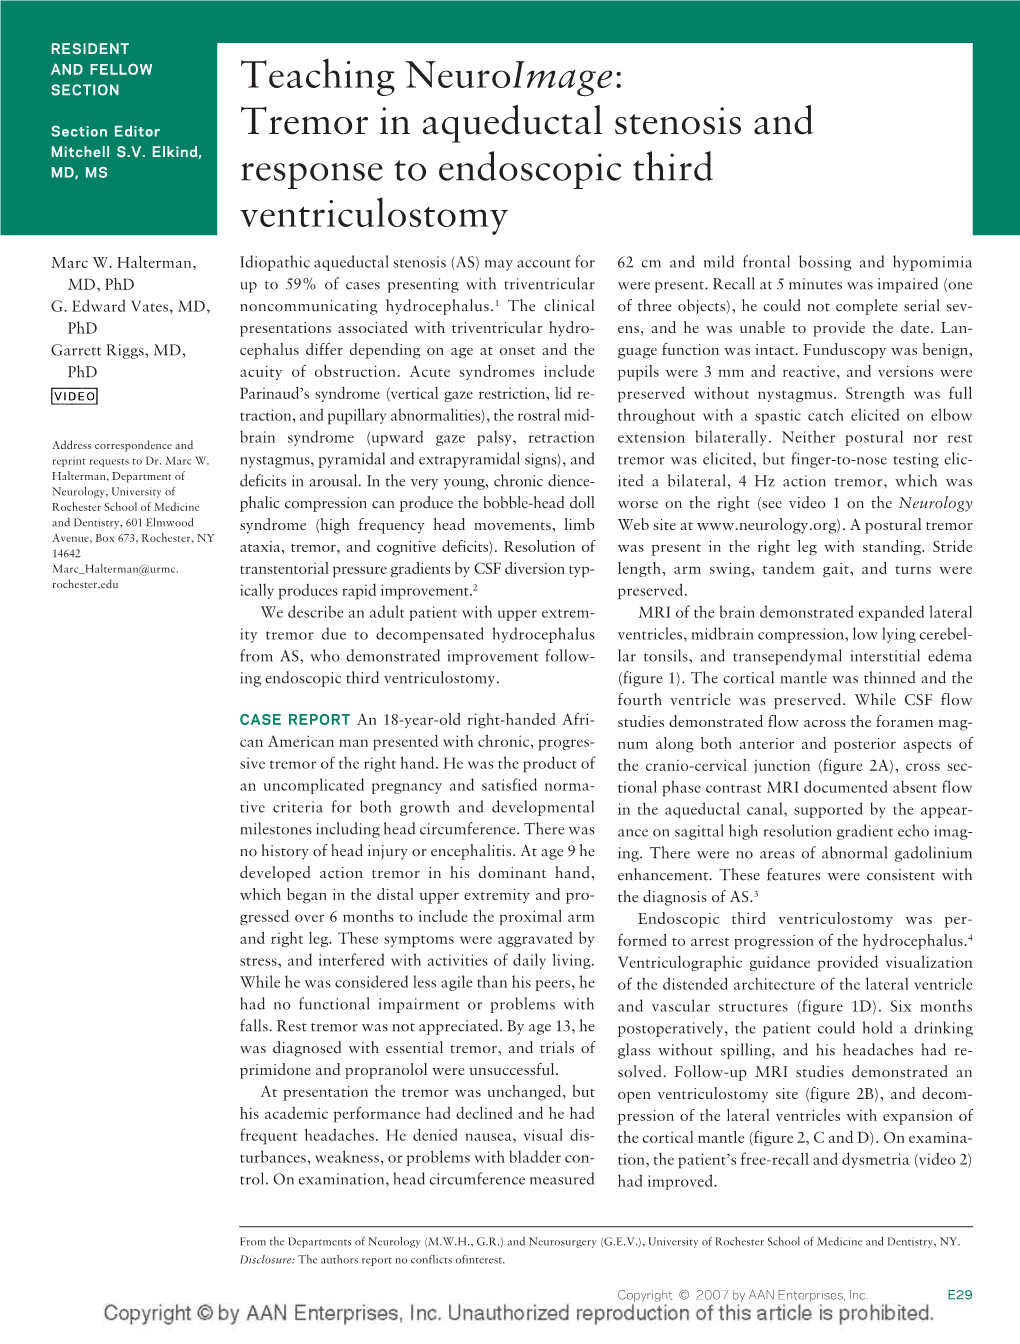 Tremor in Aqueductal Stenosis and Response to Endoscopic Third Ventriculostomy Marc W